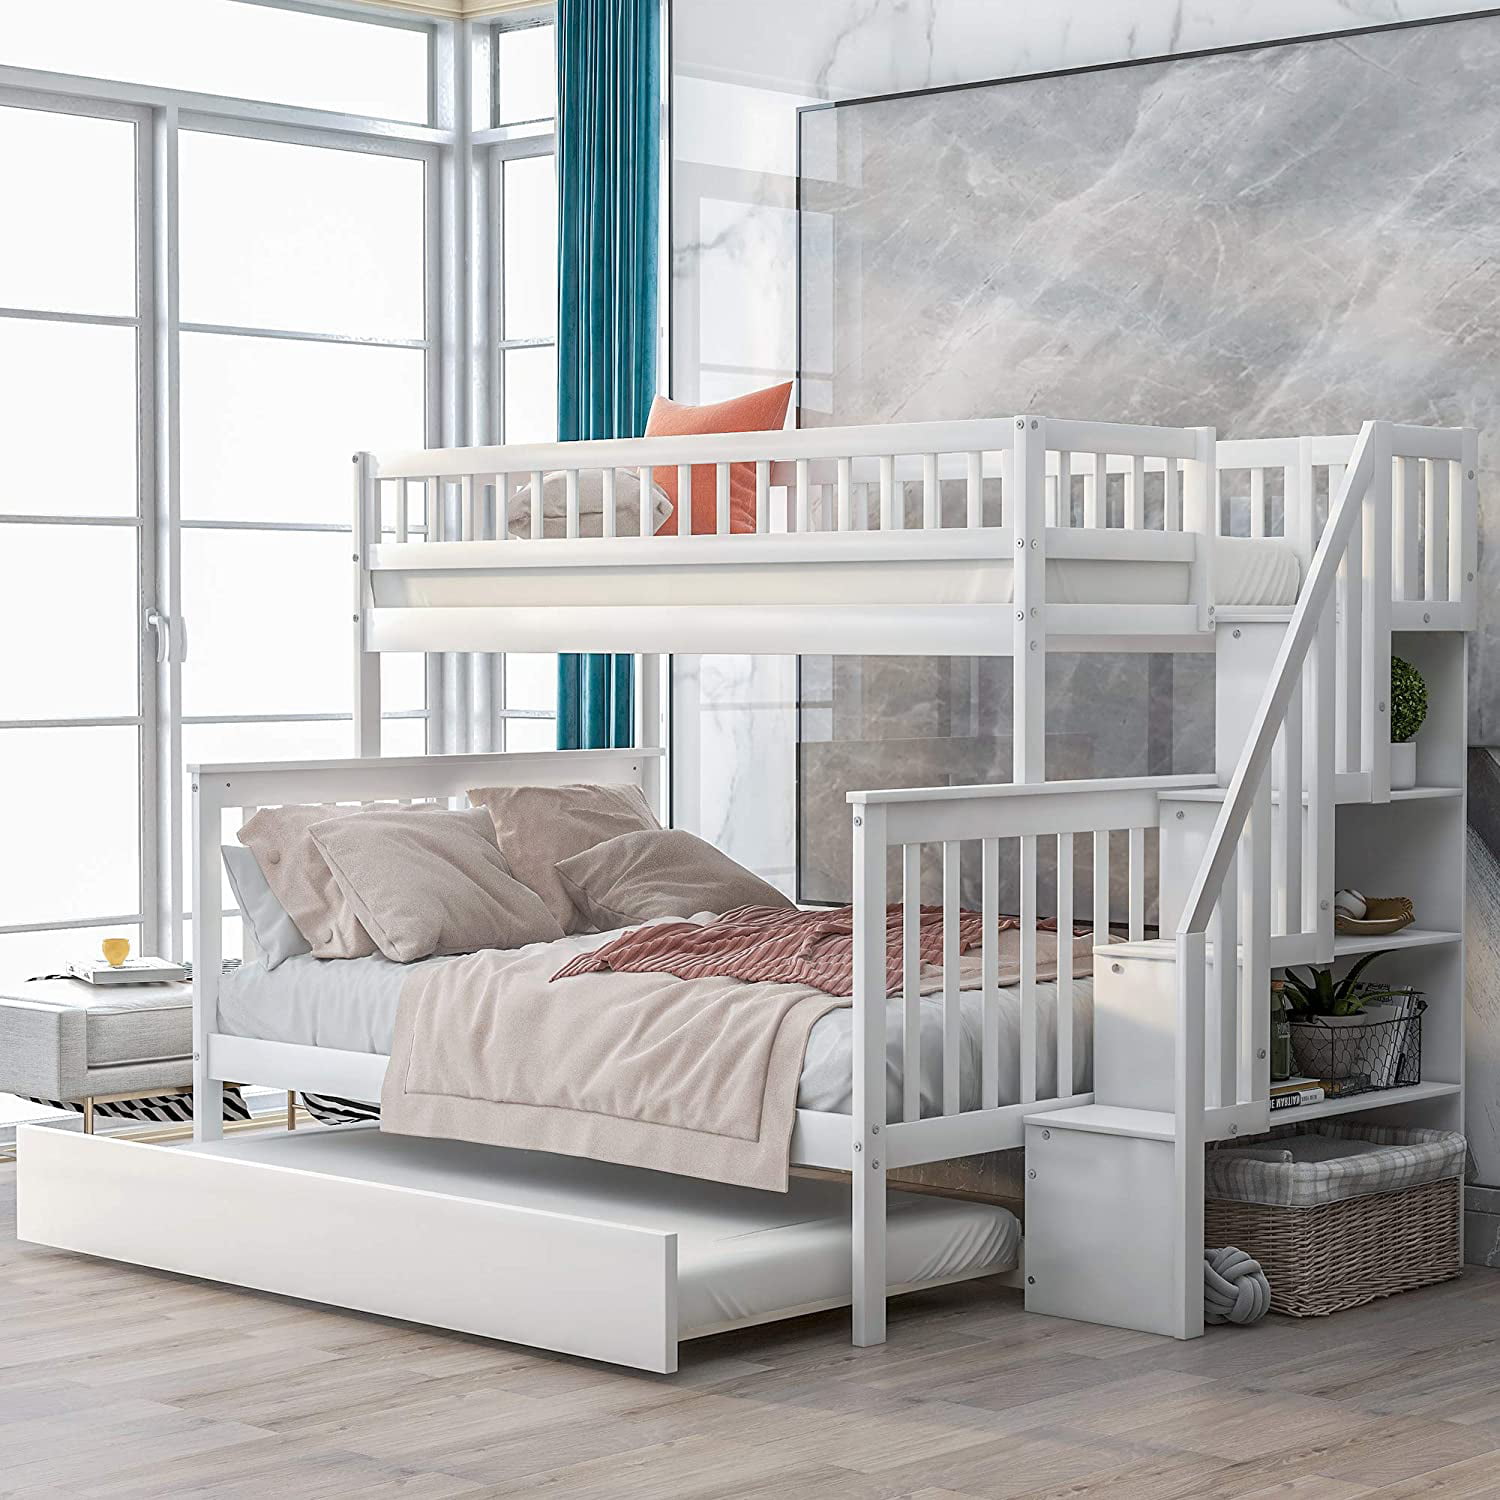 Piscis Bunk Bed Beds Twin Over, Bunk Bed And Trundle